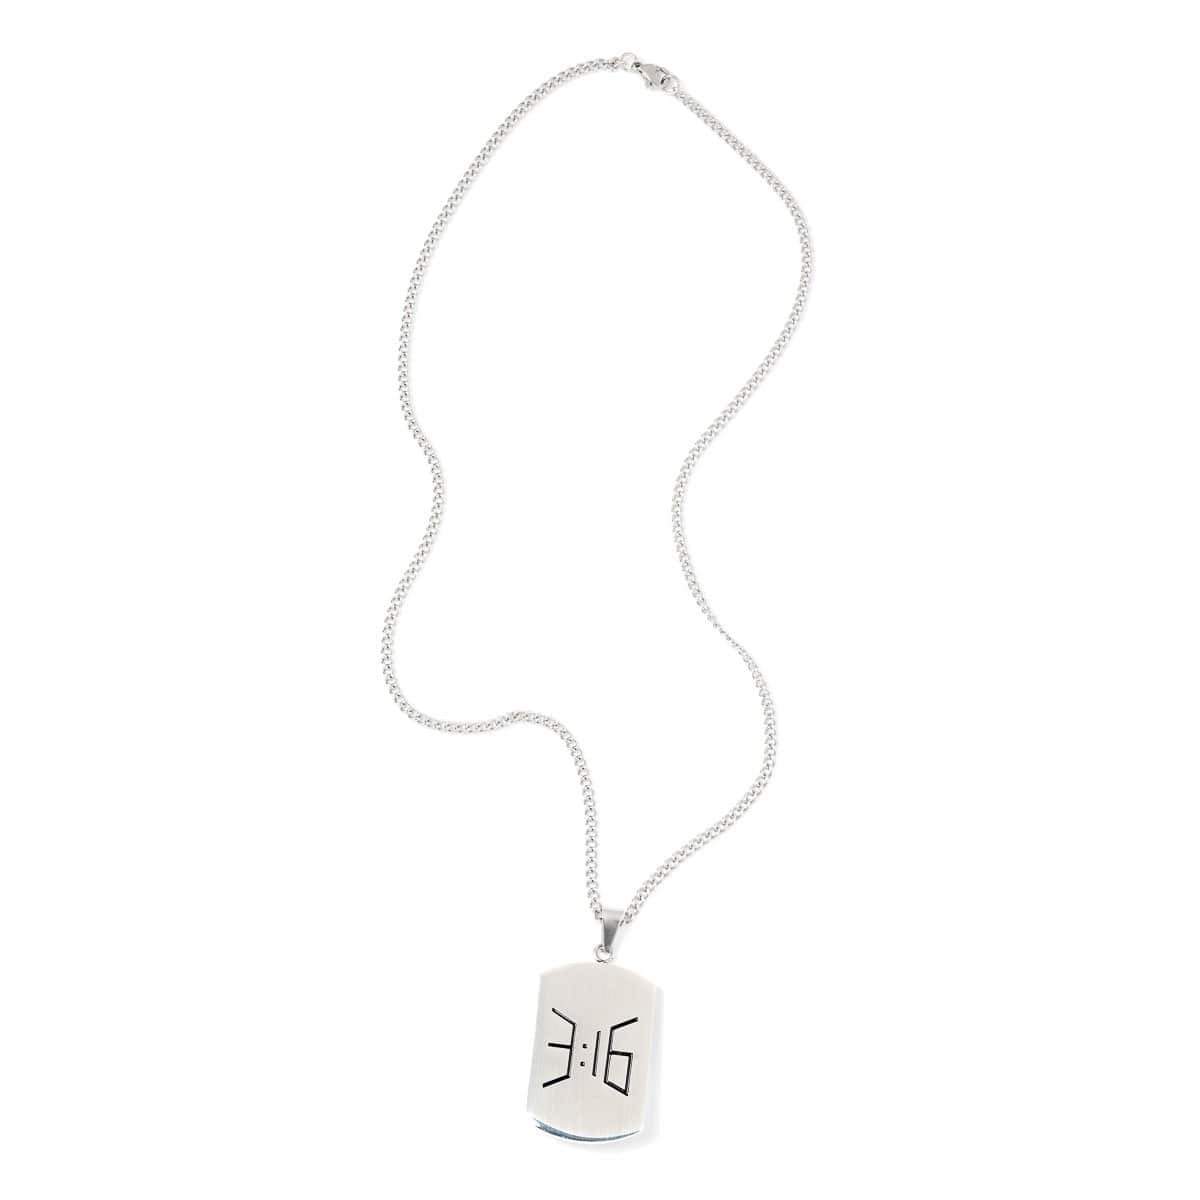 316collection Jewelry 3:16 Dogtag Necklace